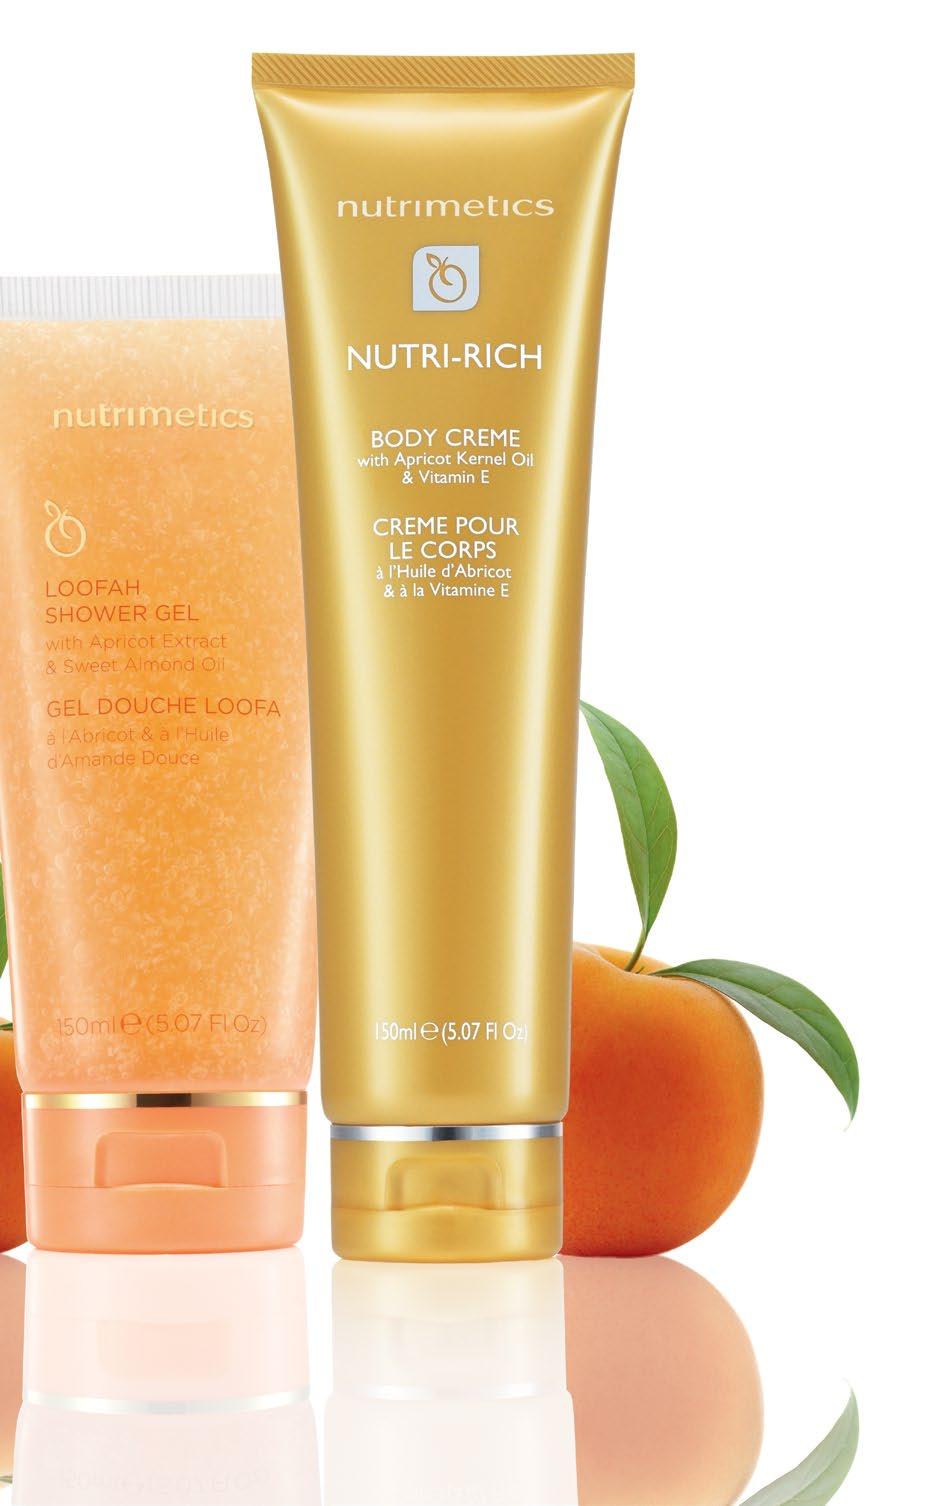 Apricot must-have Duo Only 9.90 with every 99.00 spend^ Valued at 63.00 RRP ^One Apricot Body Duo per 99.